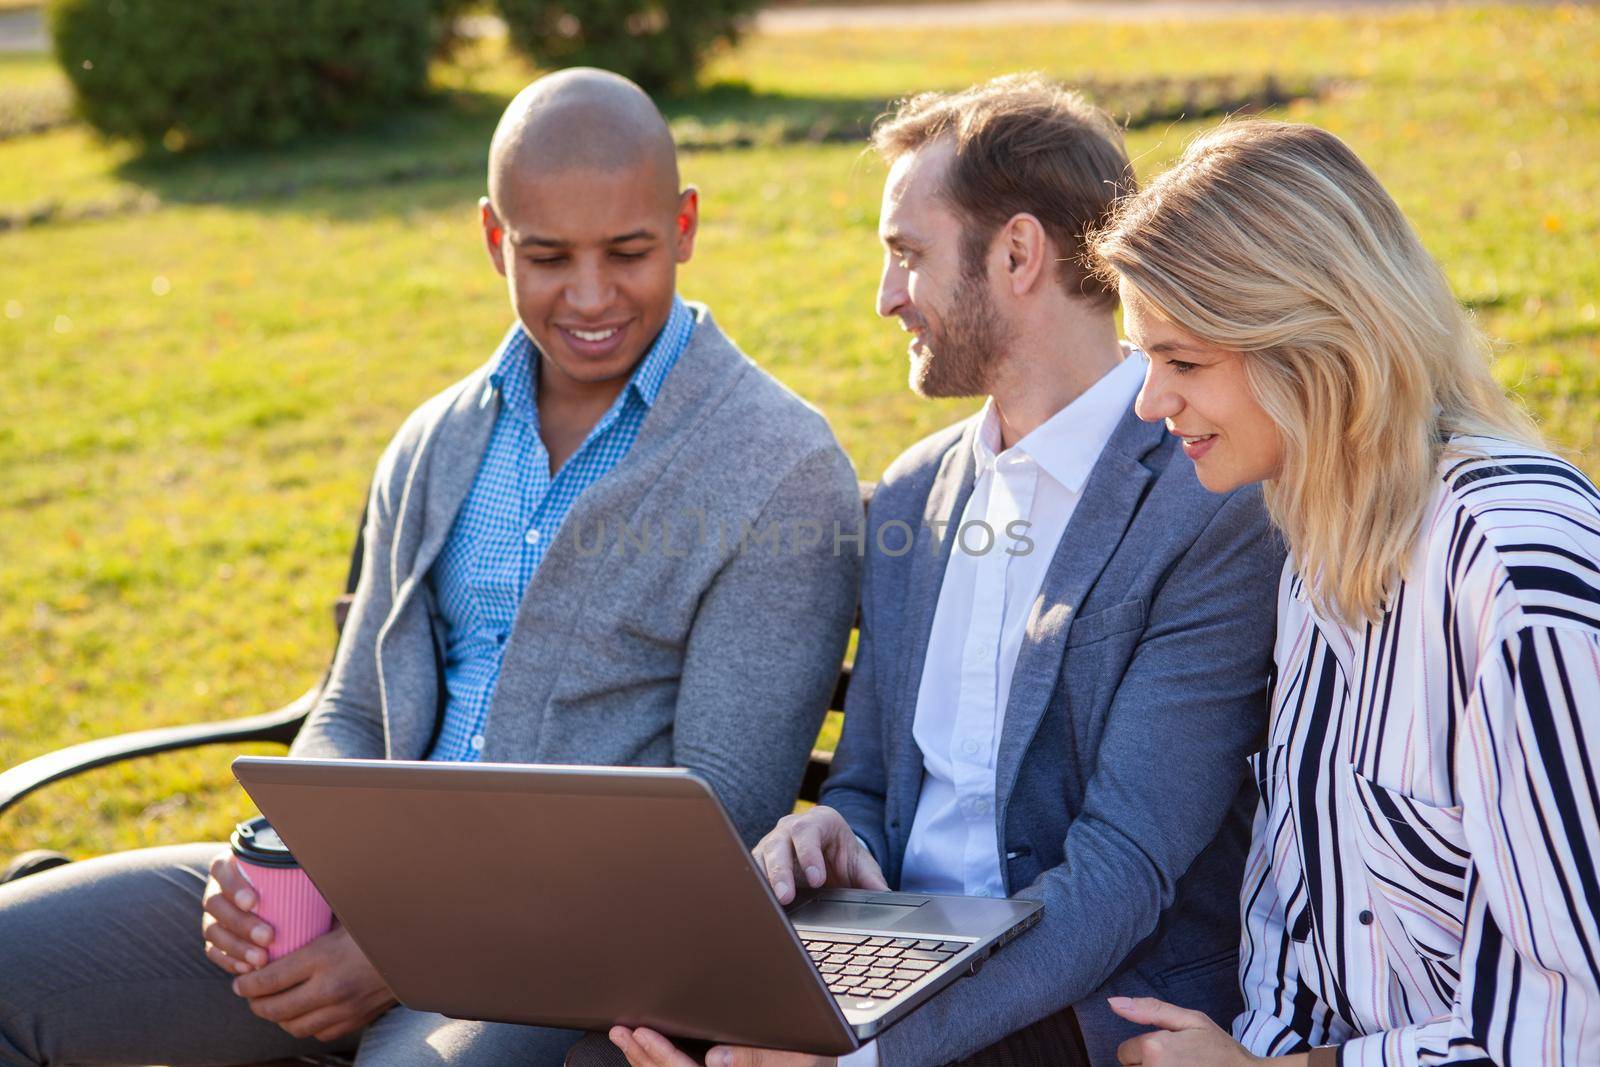 Mature businesswoman meeting with her male colleagues outdoors in the park. Business team discussing project, using laptop